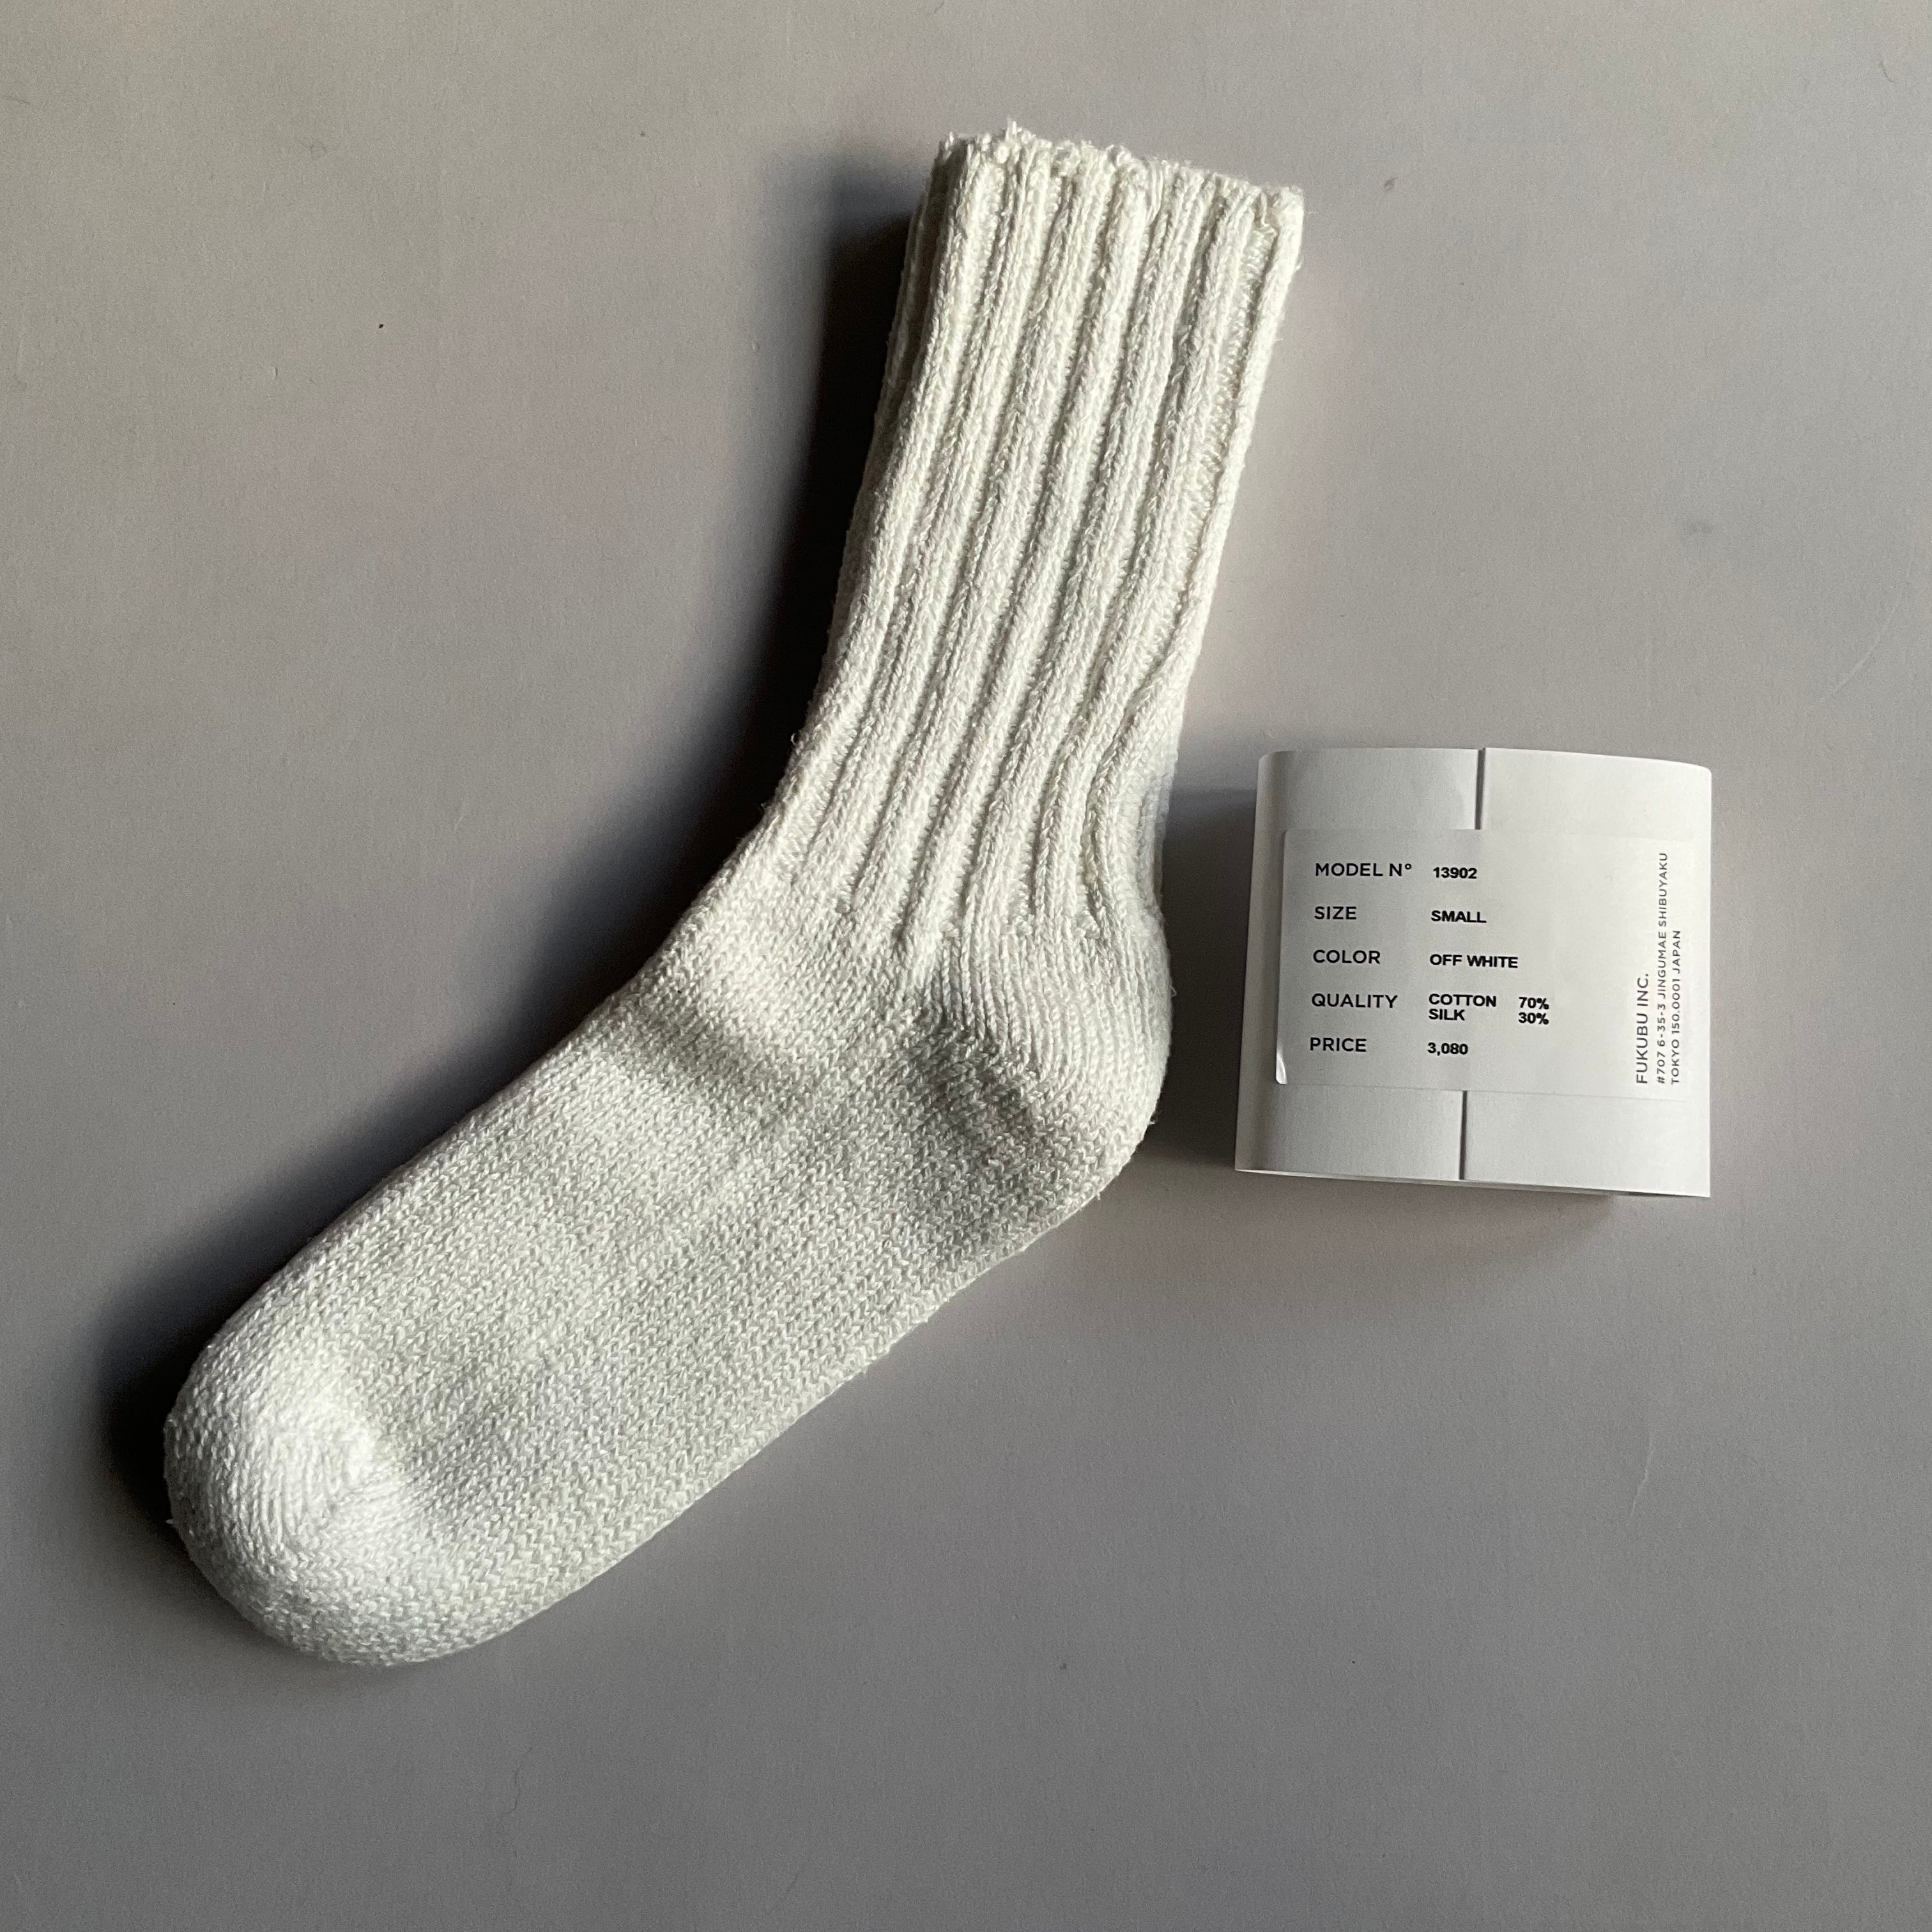 YAECA / ヤエカ　COTTON/SILK SOCKS #13902 Off white | Routes*Roots powered by  BASE